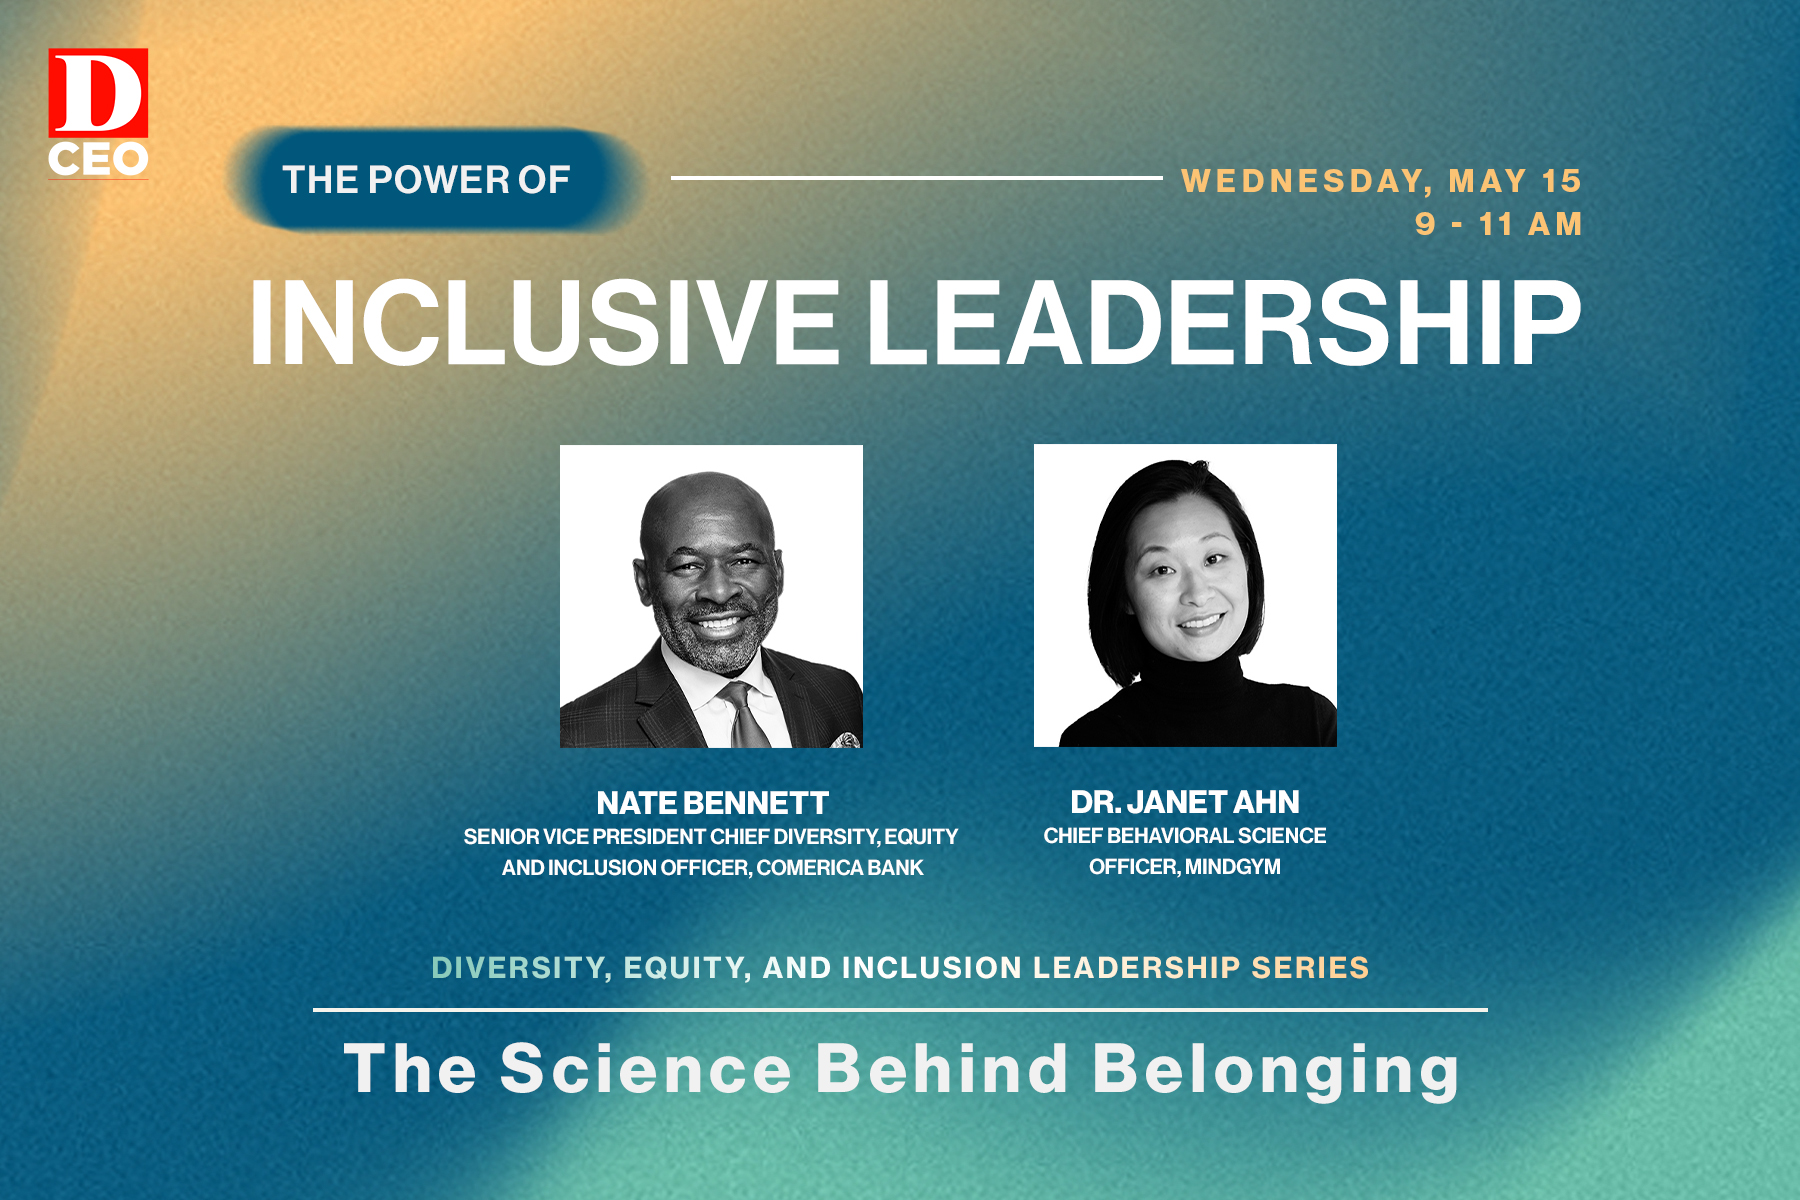 Leader’s Inclusive Power: Understanding the Science of Belonging as Presented by D CEO